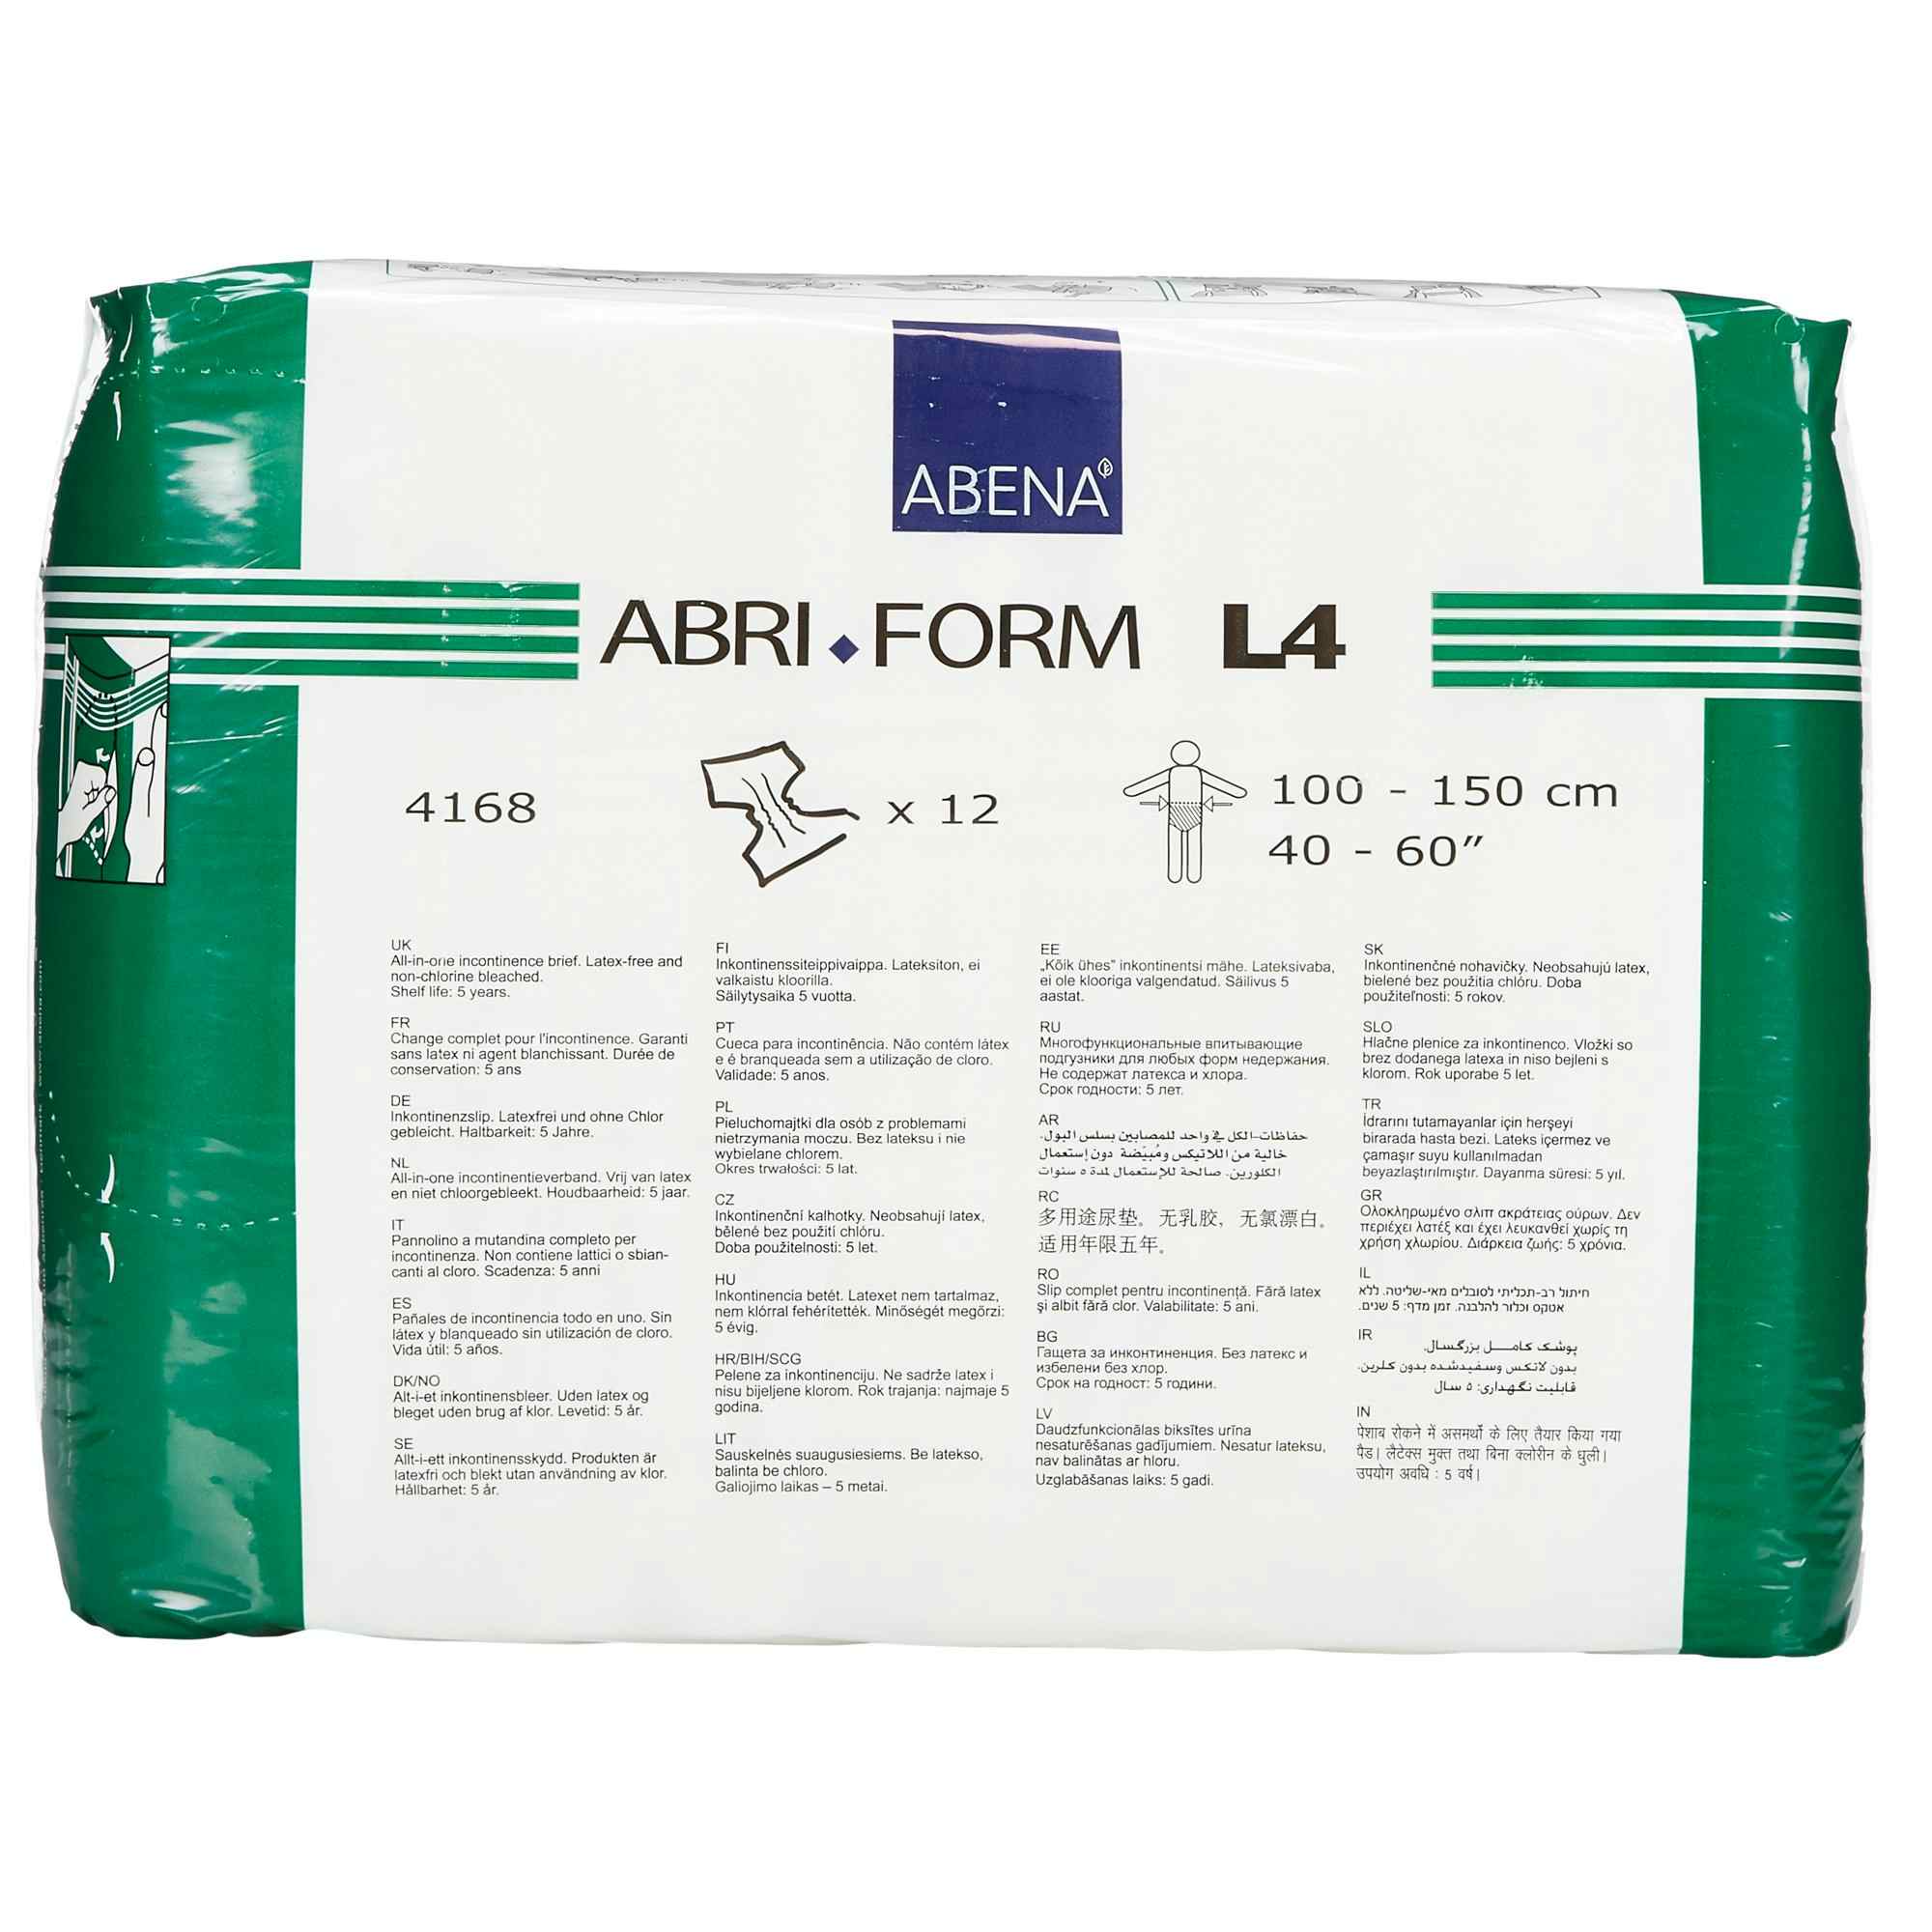 Abena Abri-Form Diapers with Tabs, L4, back